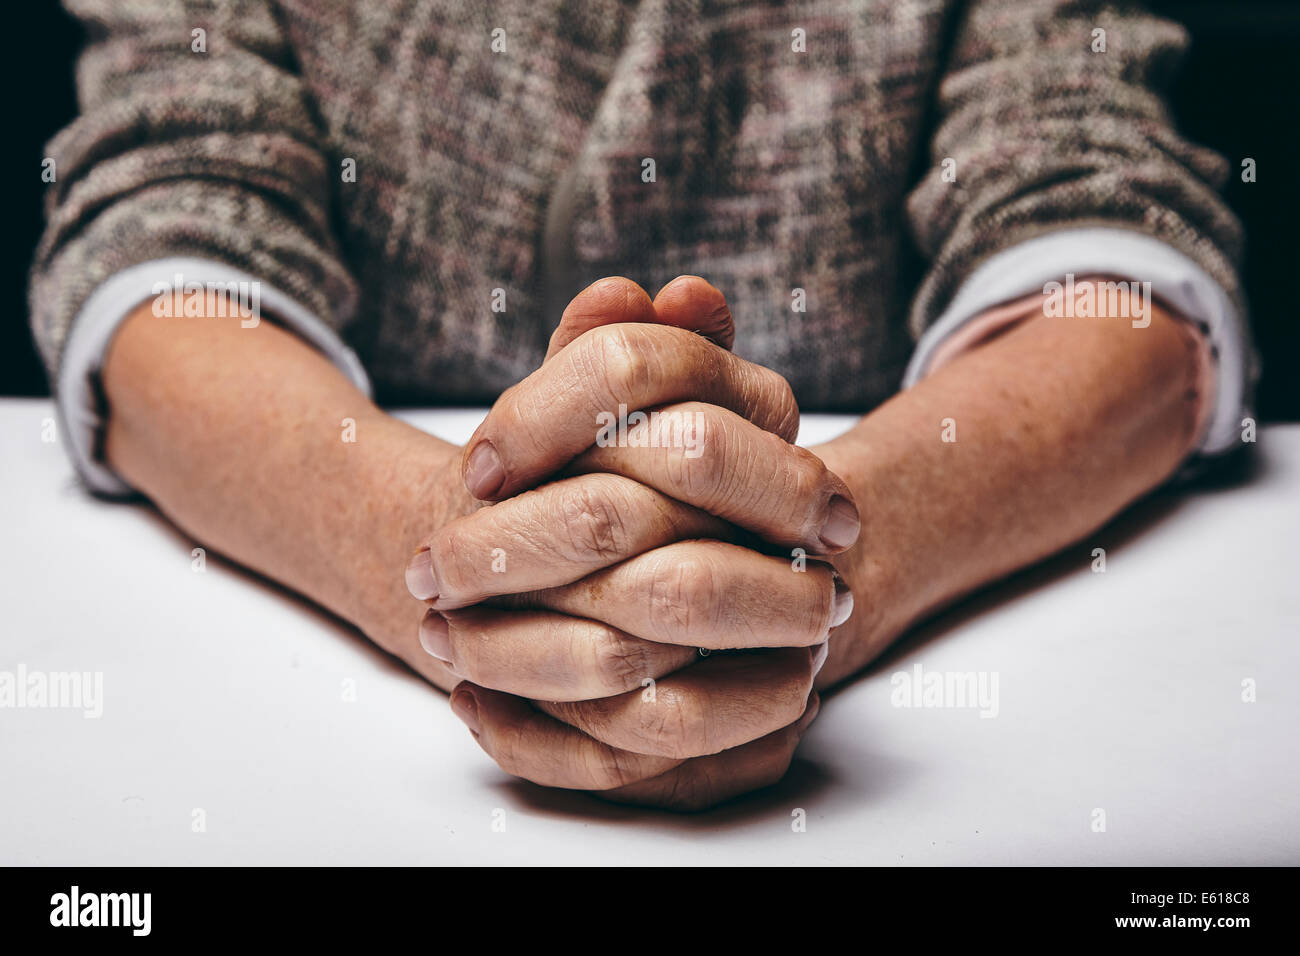 Studio photography of praying hands of a senior woman on table. Old hands clasped on a table. Stock Photo